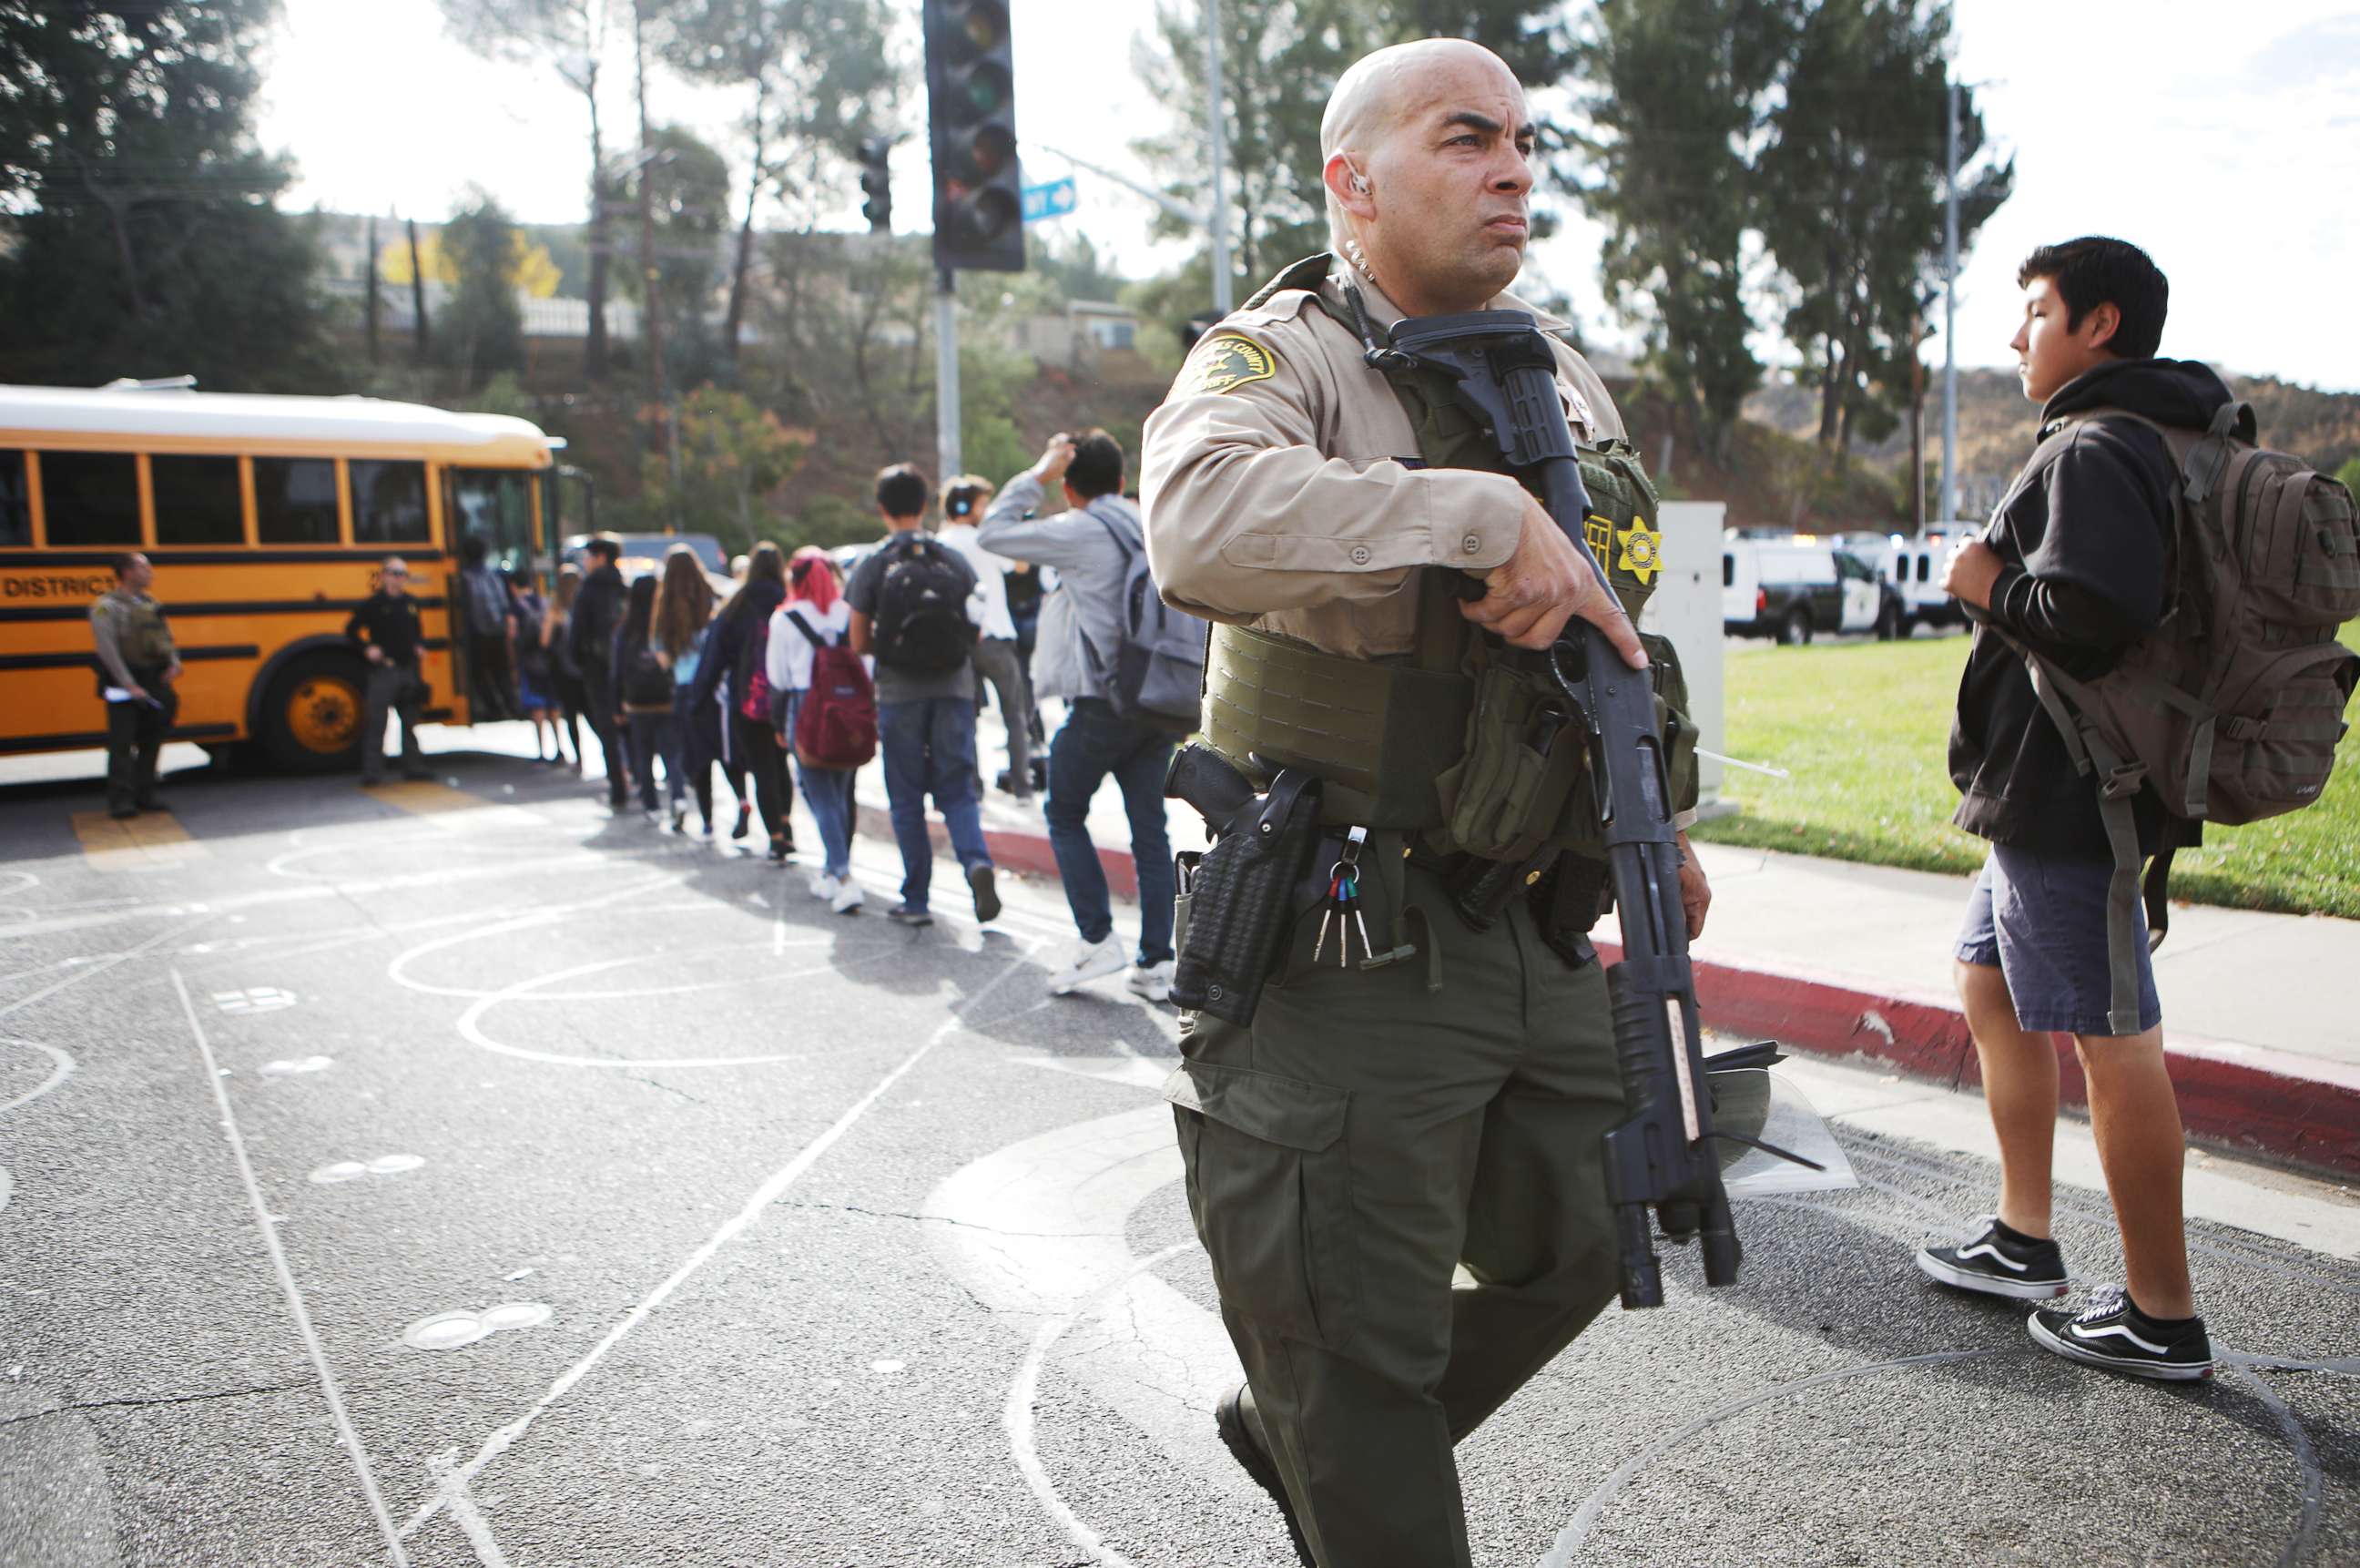 PHOTO: Students are evacuated from Saugus High School onto a school bus after a shooting at the school left two students dead and three wounded, Nov. 14, 2019, in Santa Clarita, California.